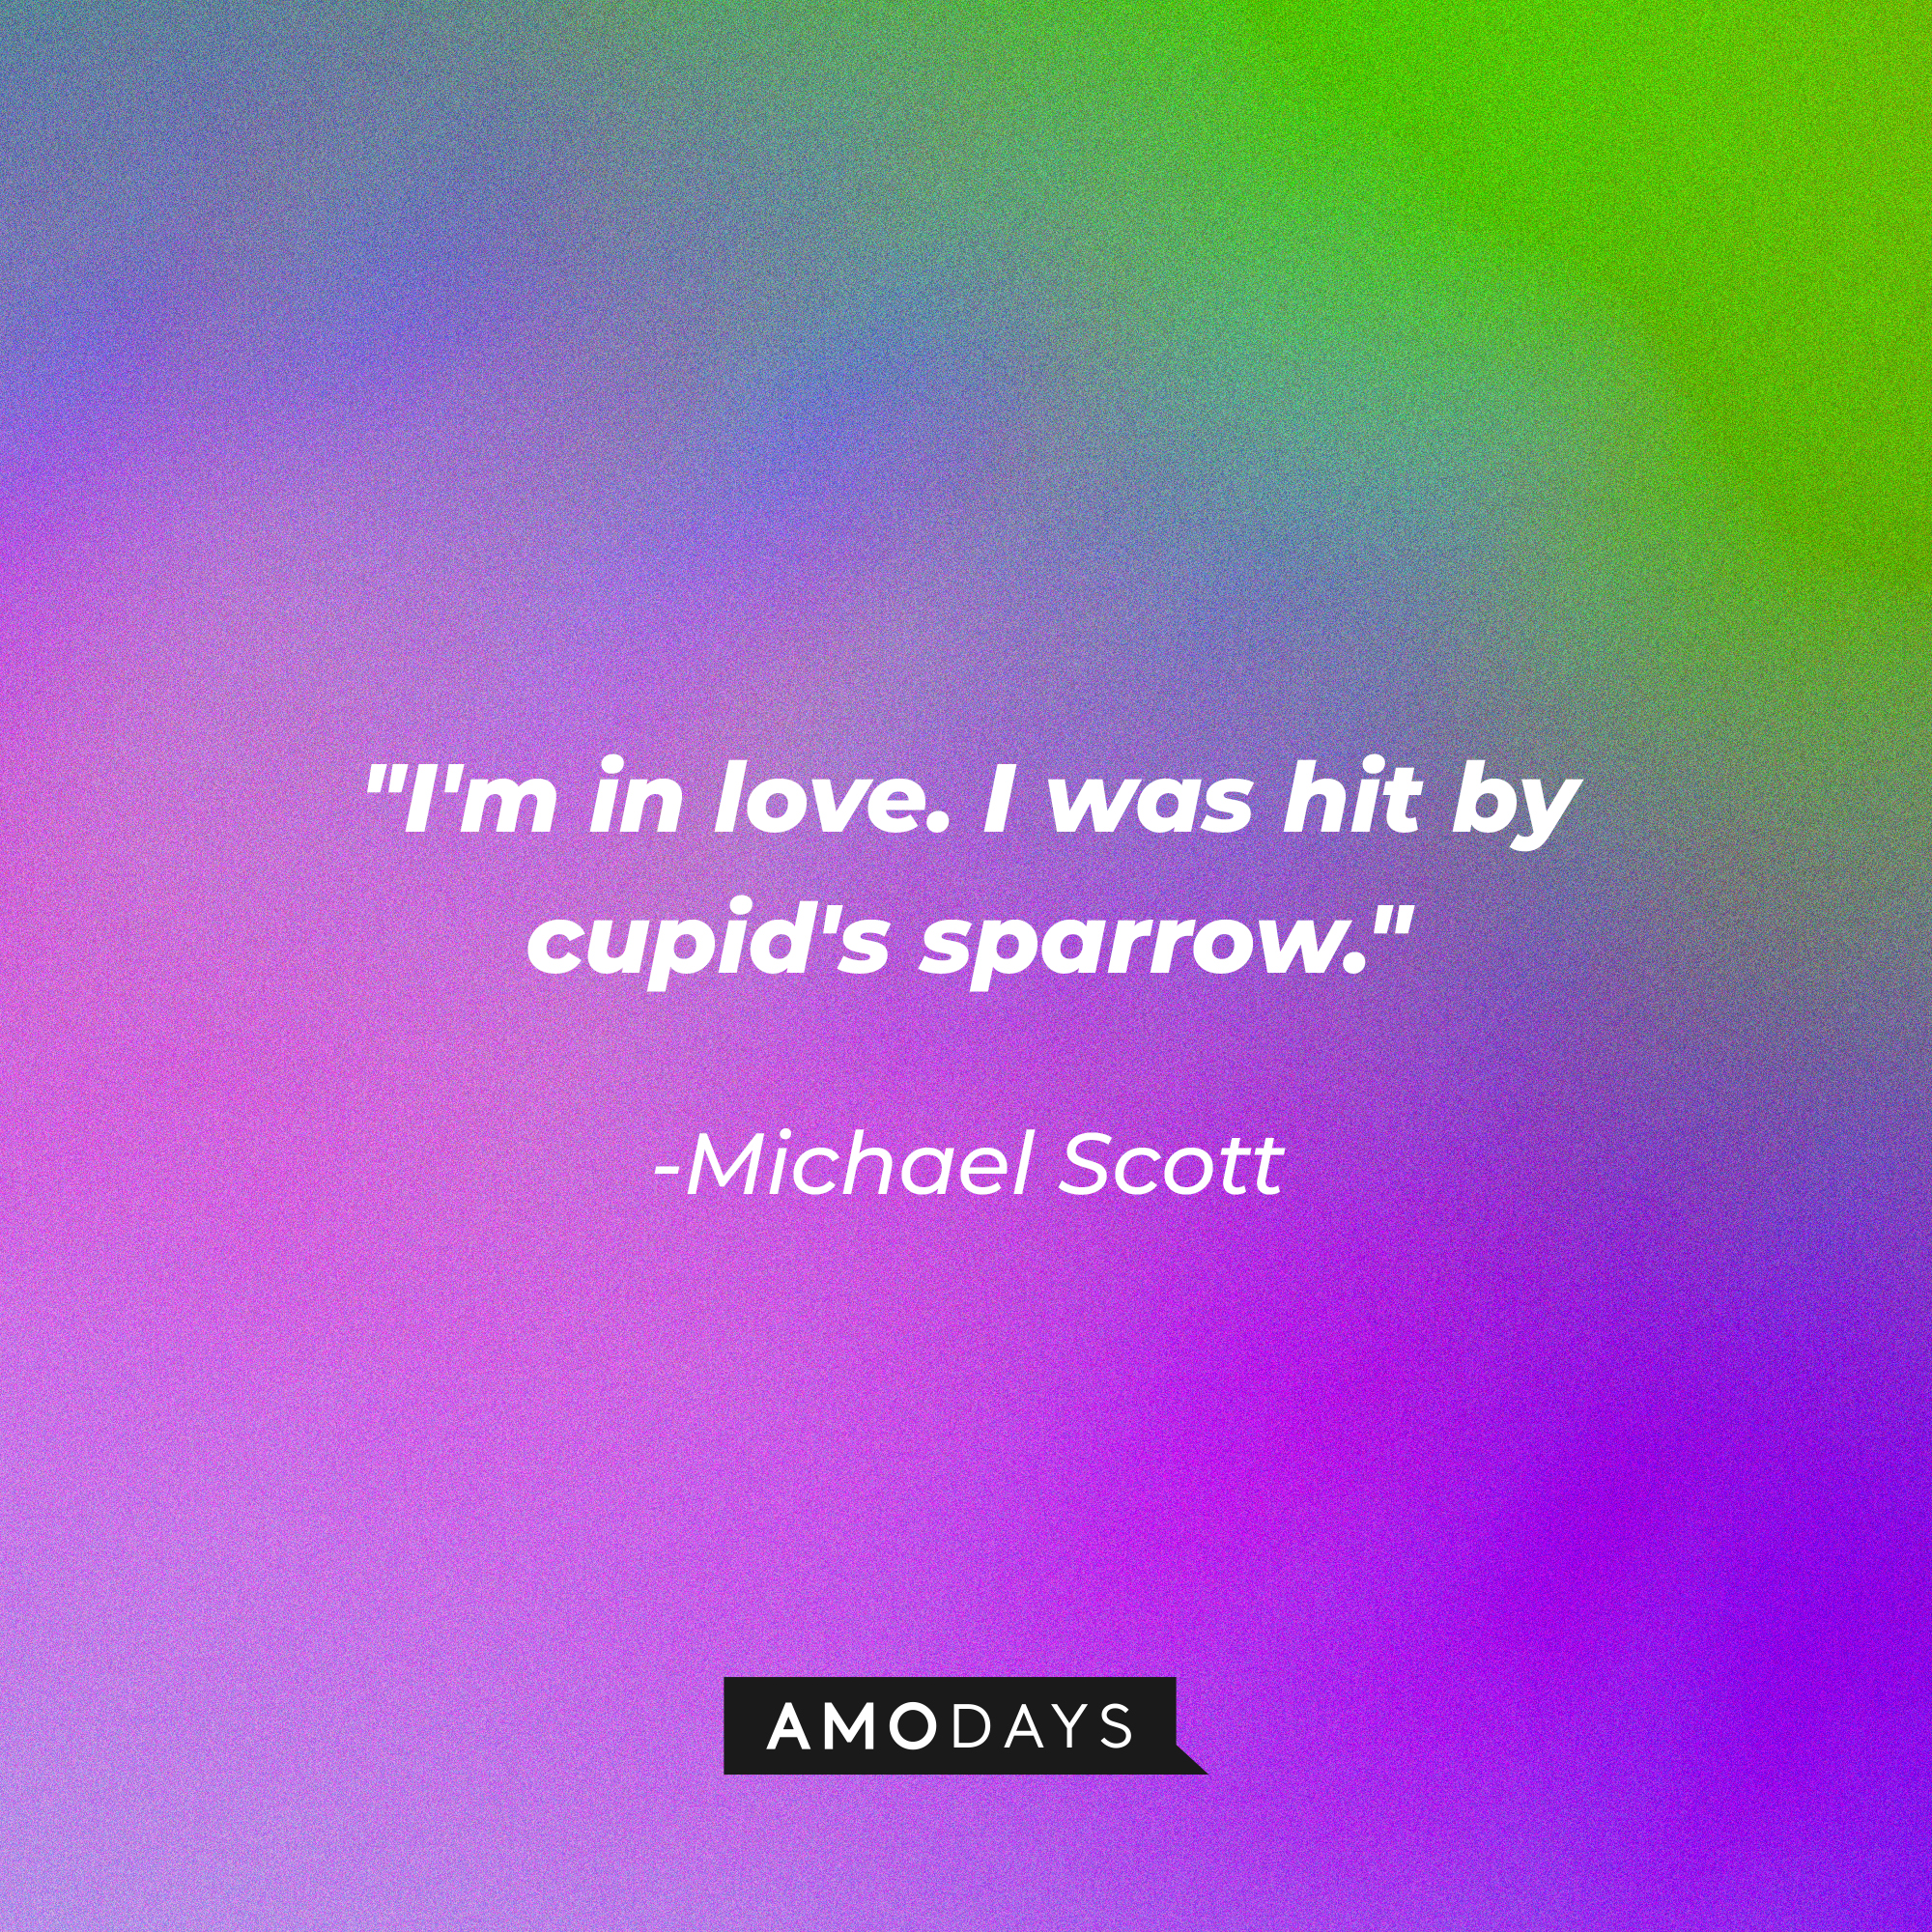 Michael Scott’s quote: "I'm in love. I was hit by cupid's sparrow." | Image: AmoDays